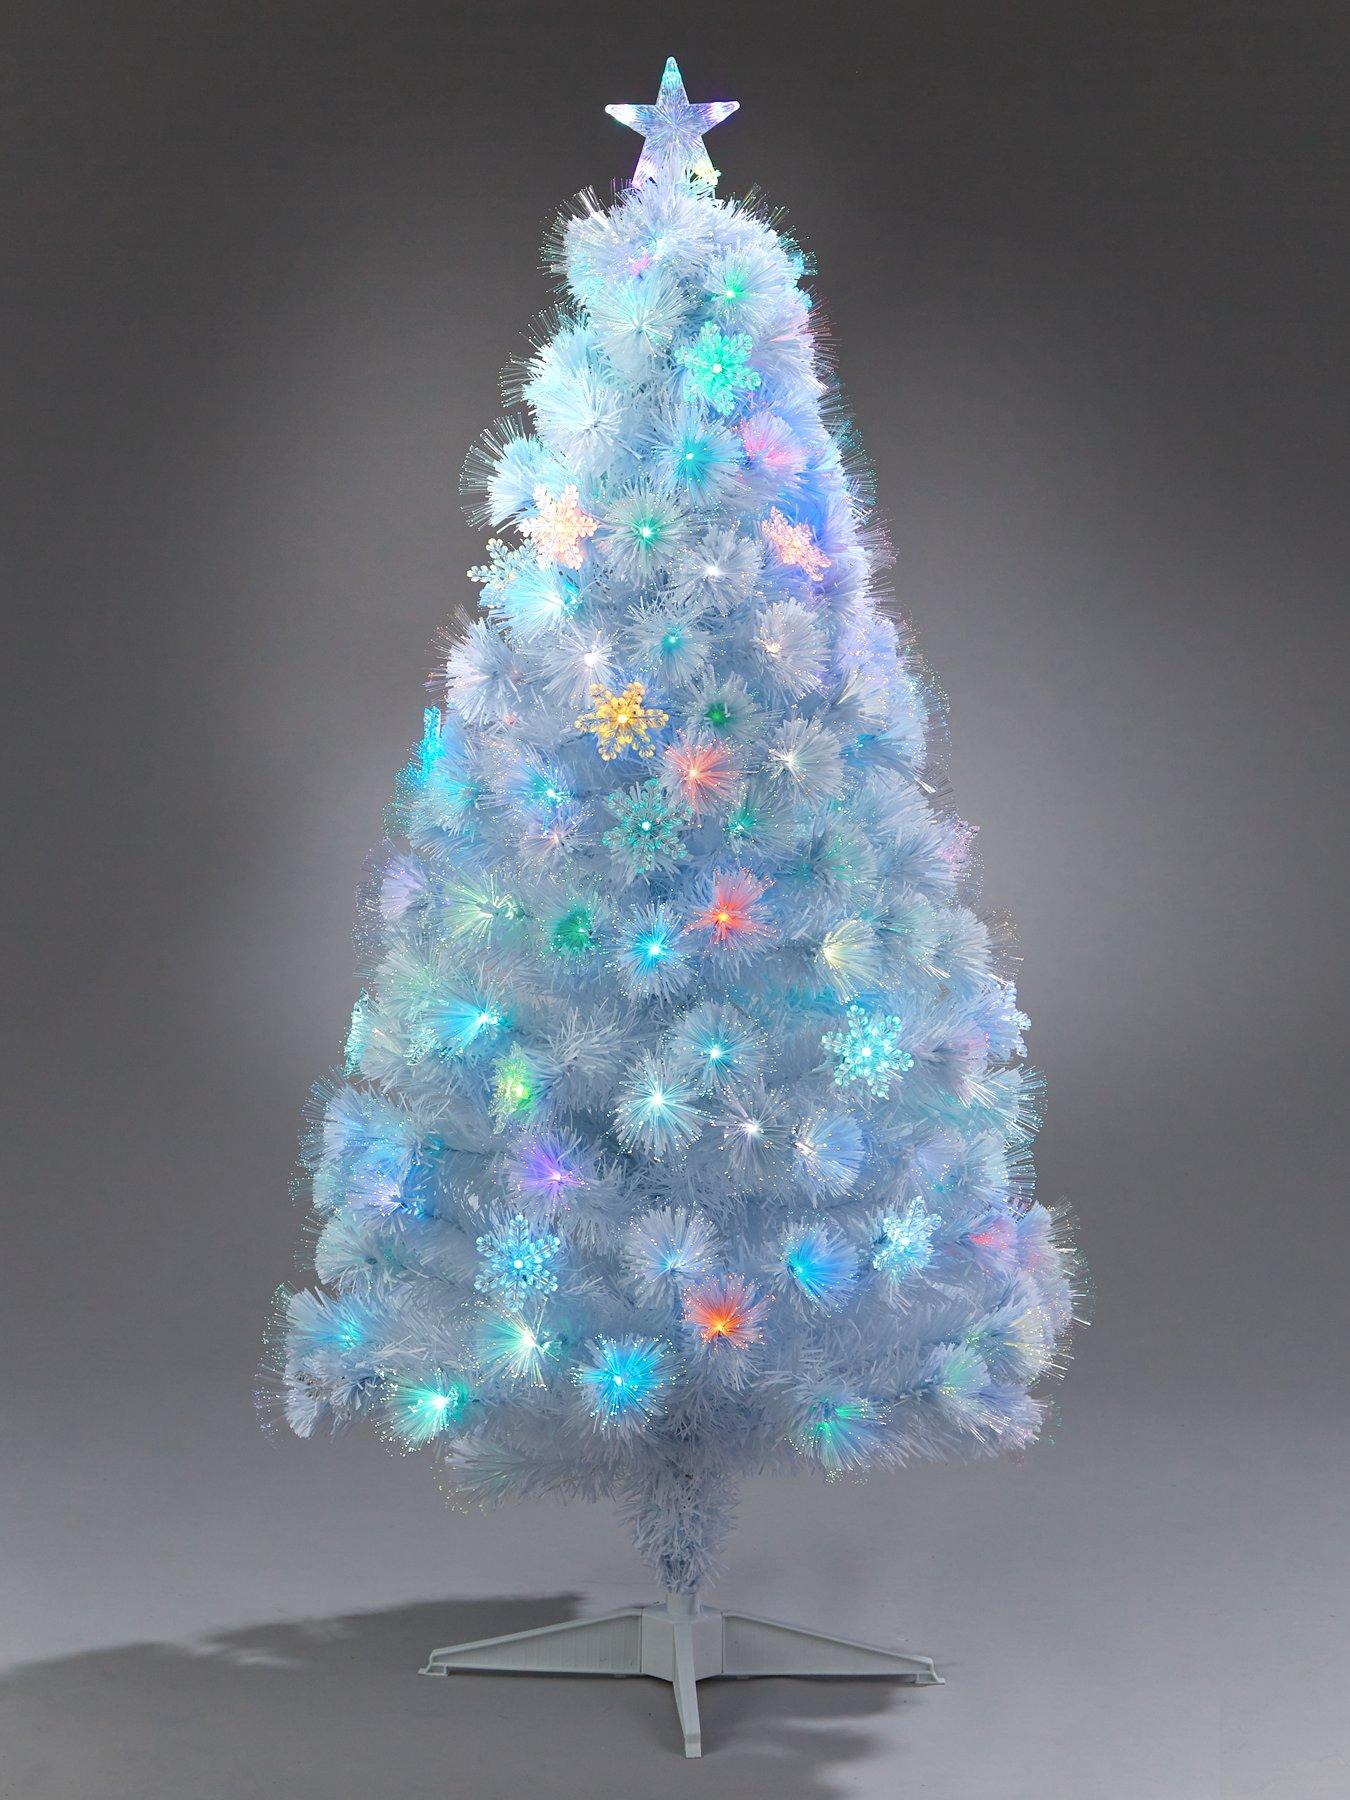 Christmas Trees Details About 4ft 6ft 7ft White Christmas Xmas Tree With 8 Modes Blue Led Lights Bushy Pine Home Garden